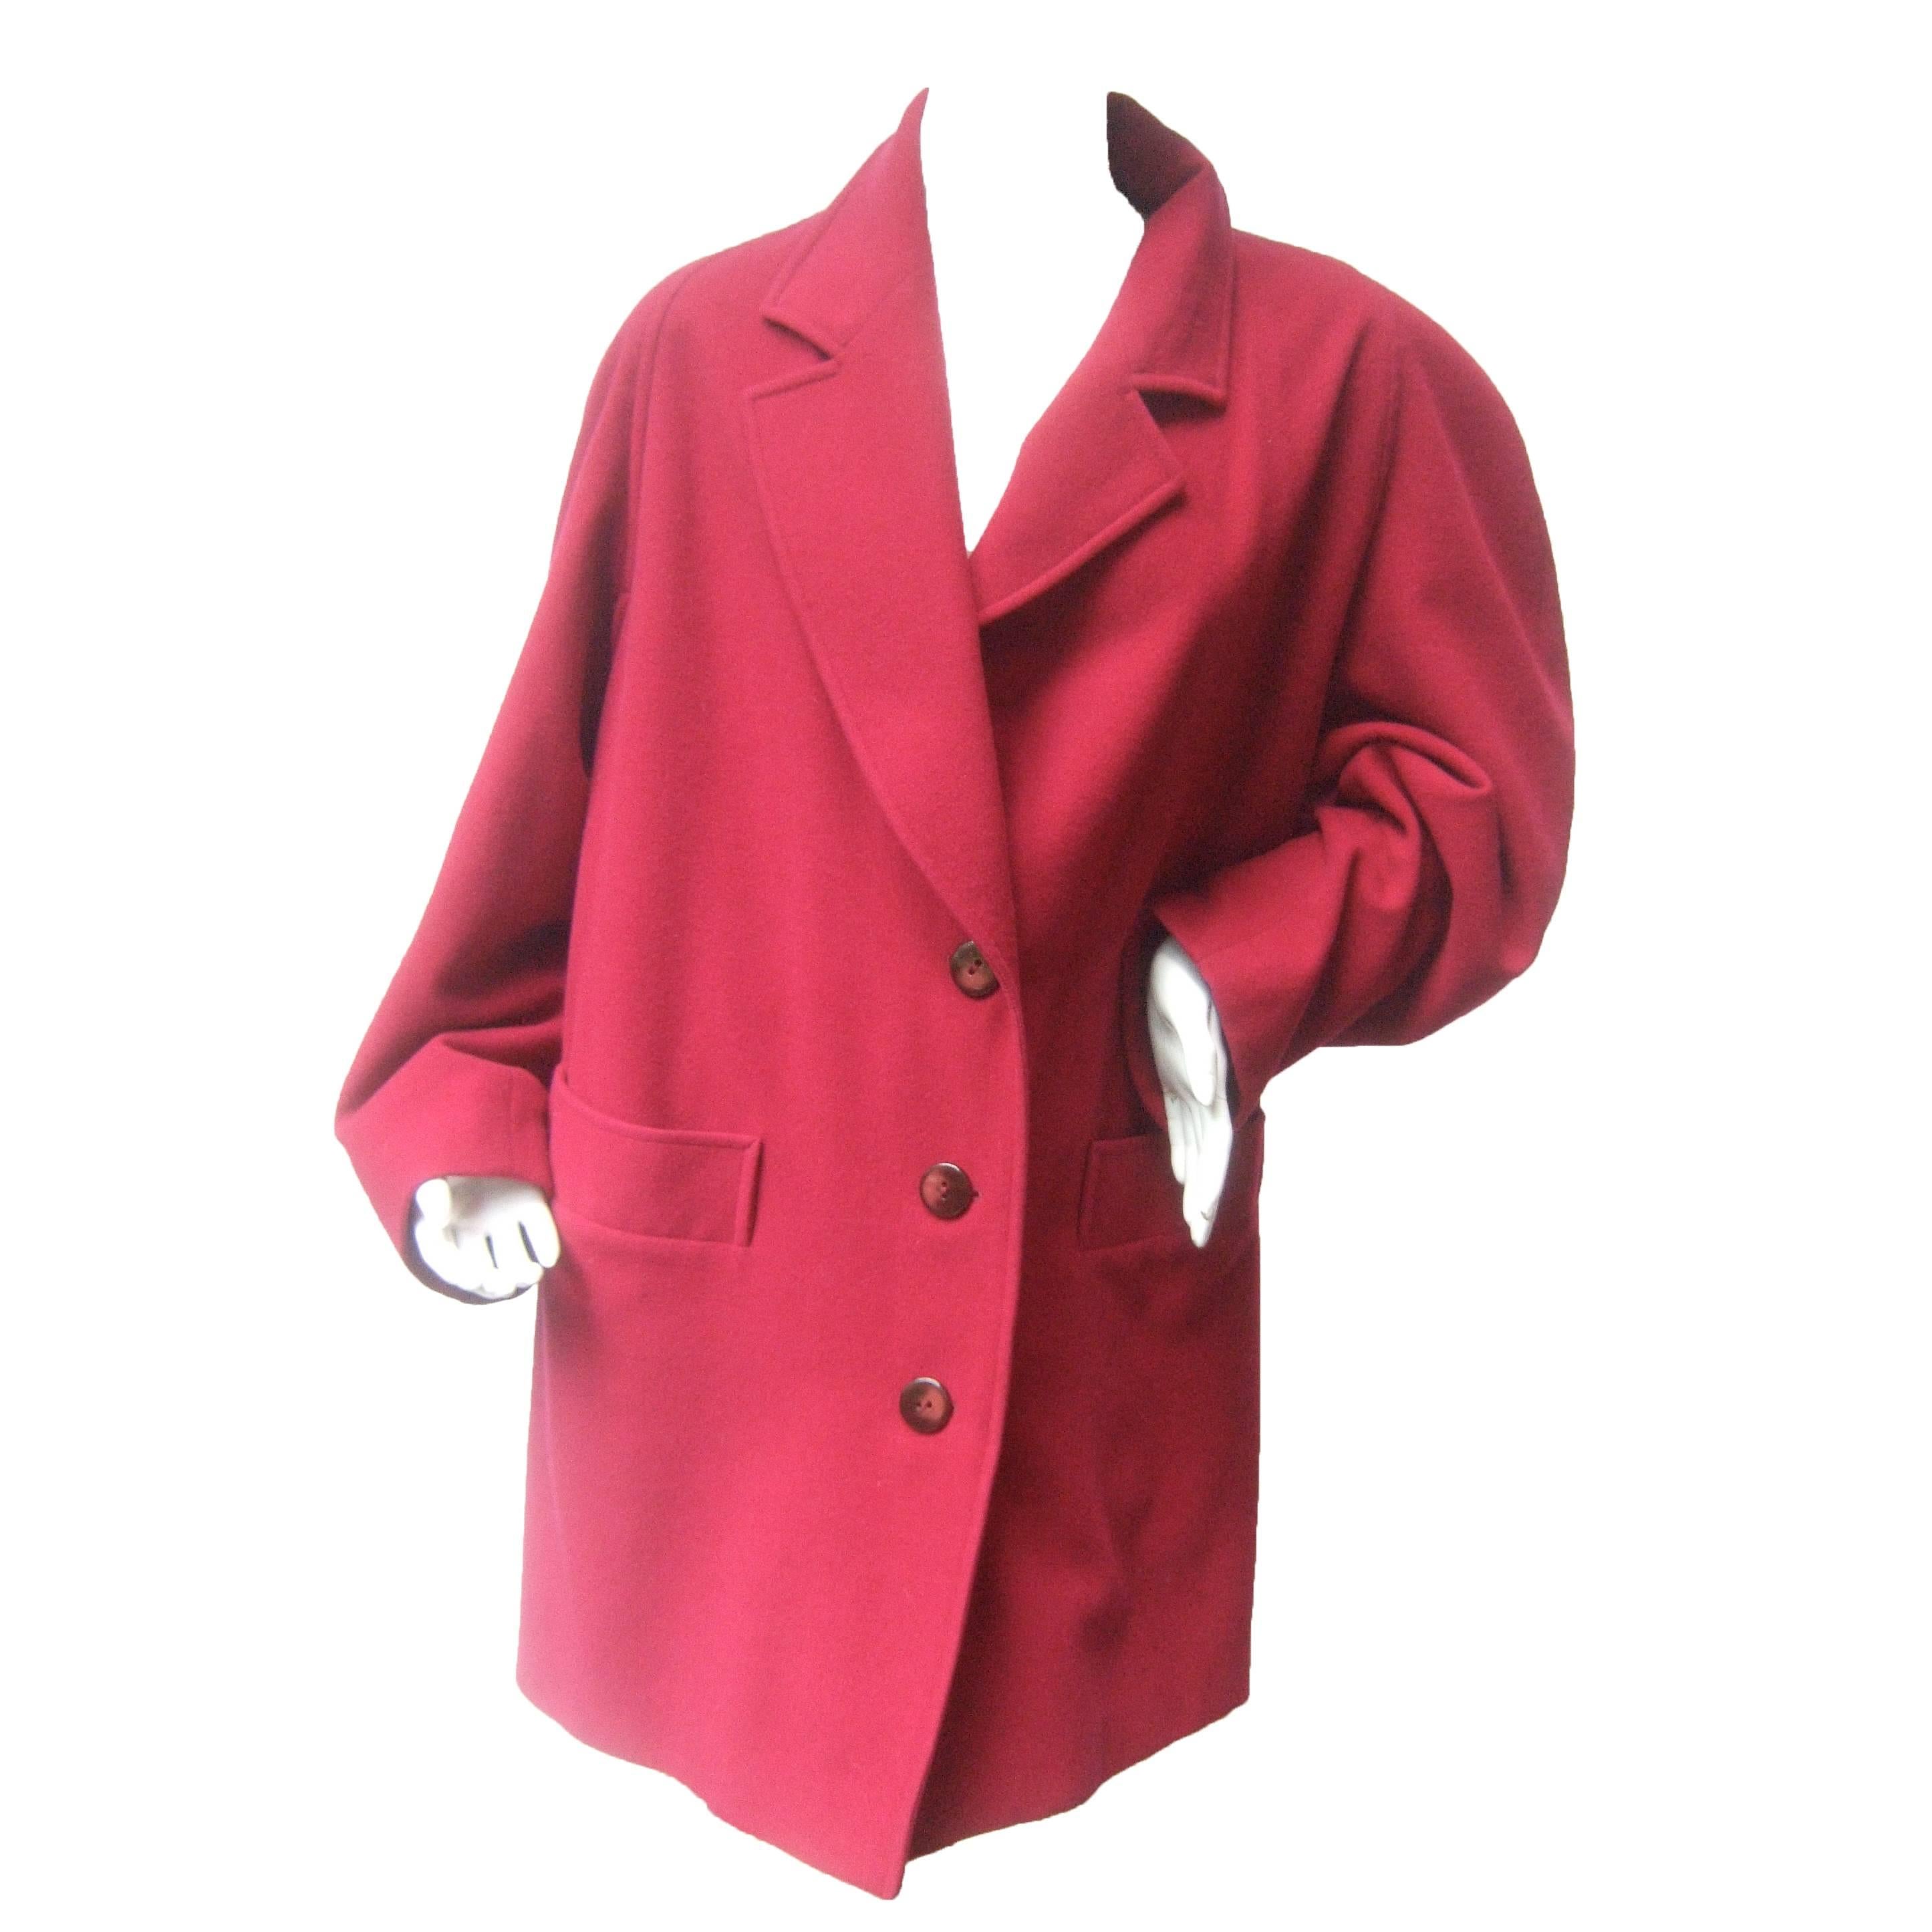 Missoni Donna Berry Color Wool 3/4 Length Coat Made in Italy